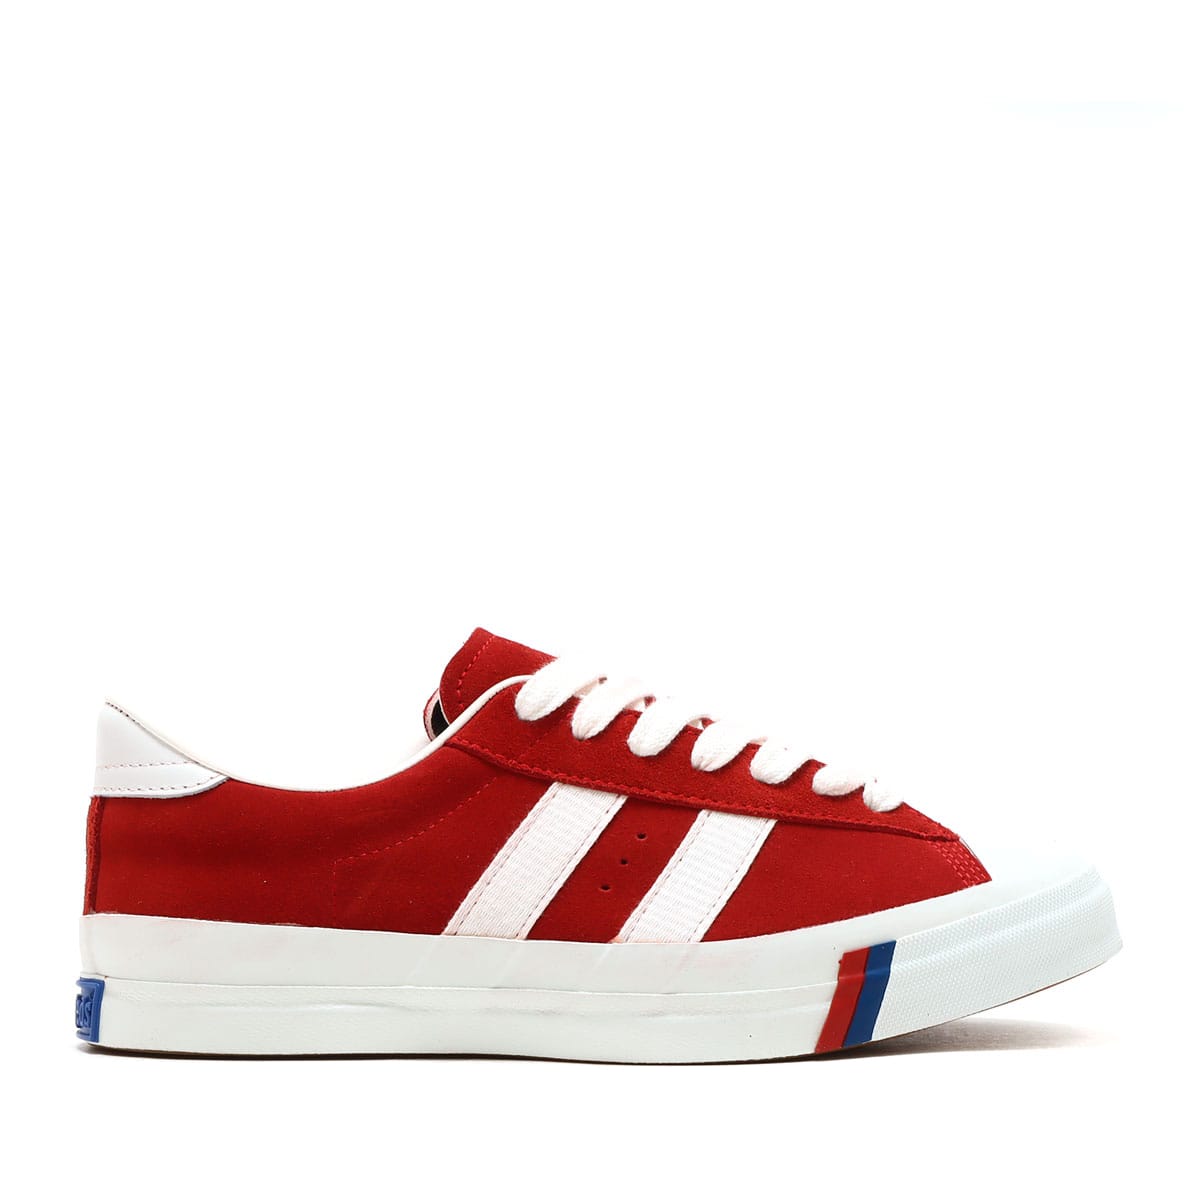 PRO-Keds ROYAL PLUS SUEDE RED 22FW-I